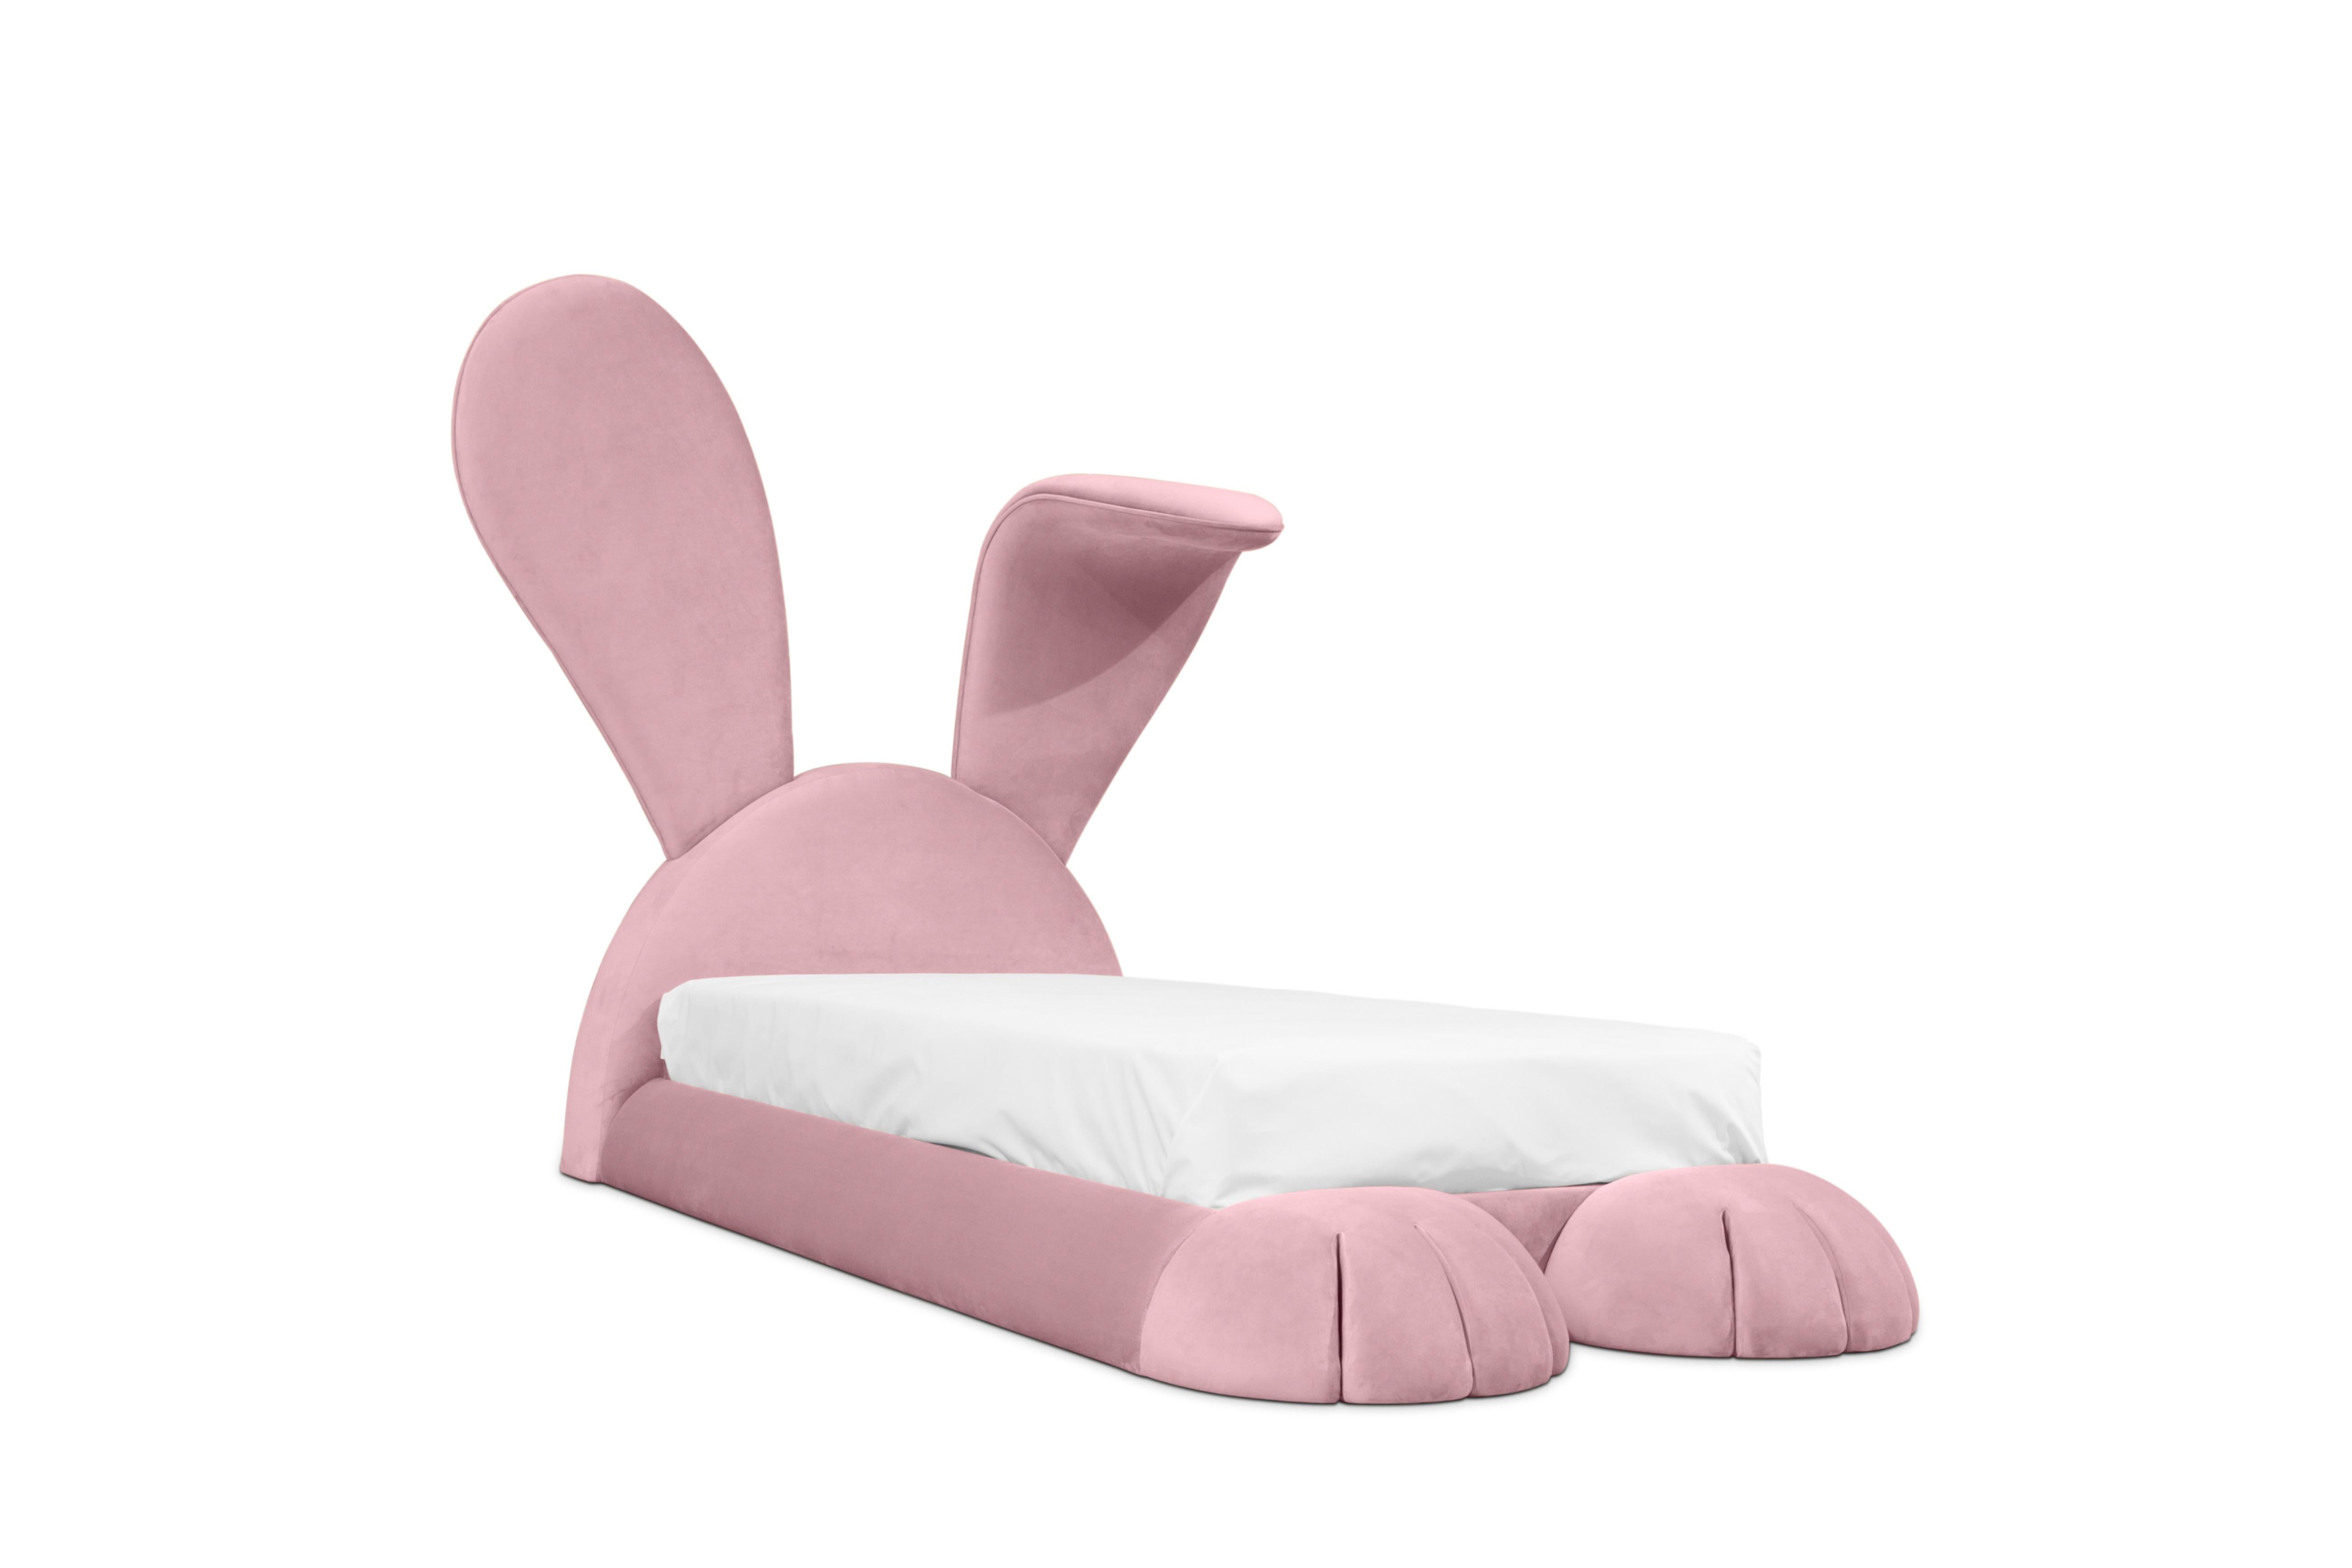 Bunny-shaped Kid's Bed in Velvet by Circu Magical Furniture is the most luxurious children's bed. This kid's bed is made by the best quality materials such as wood, velvet and with an incorporated LED light in its ear, so it can be a great resource